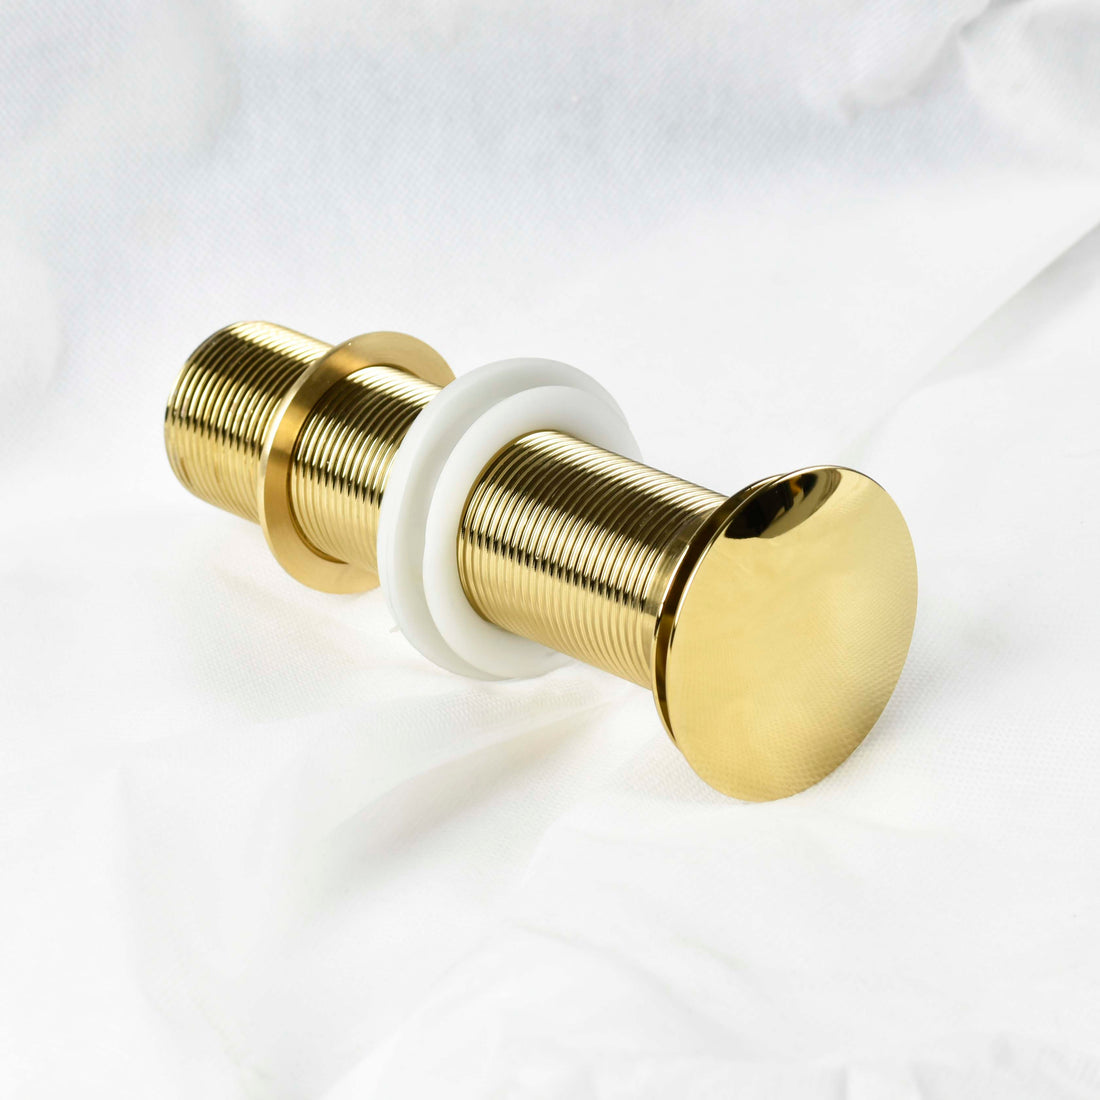 InArt Brass Full Threaded Pop-Up Waste Coupling 32 MM (7", Gold) - InArt-Studio